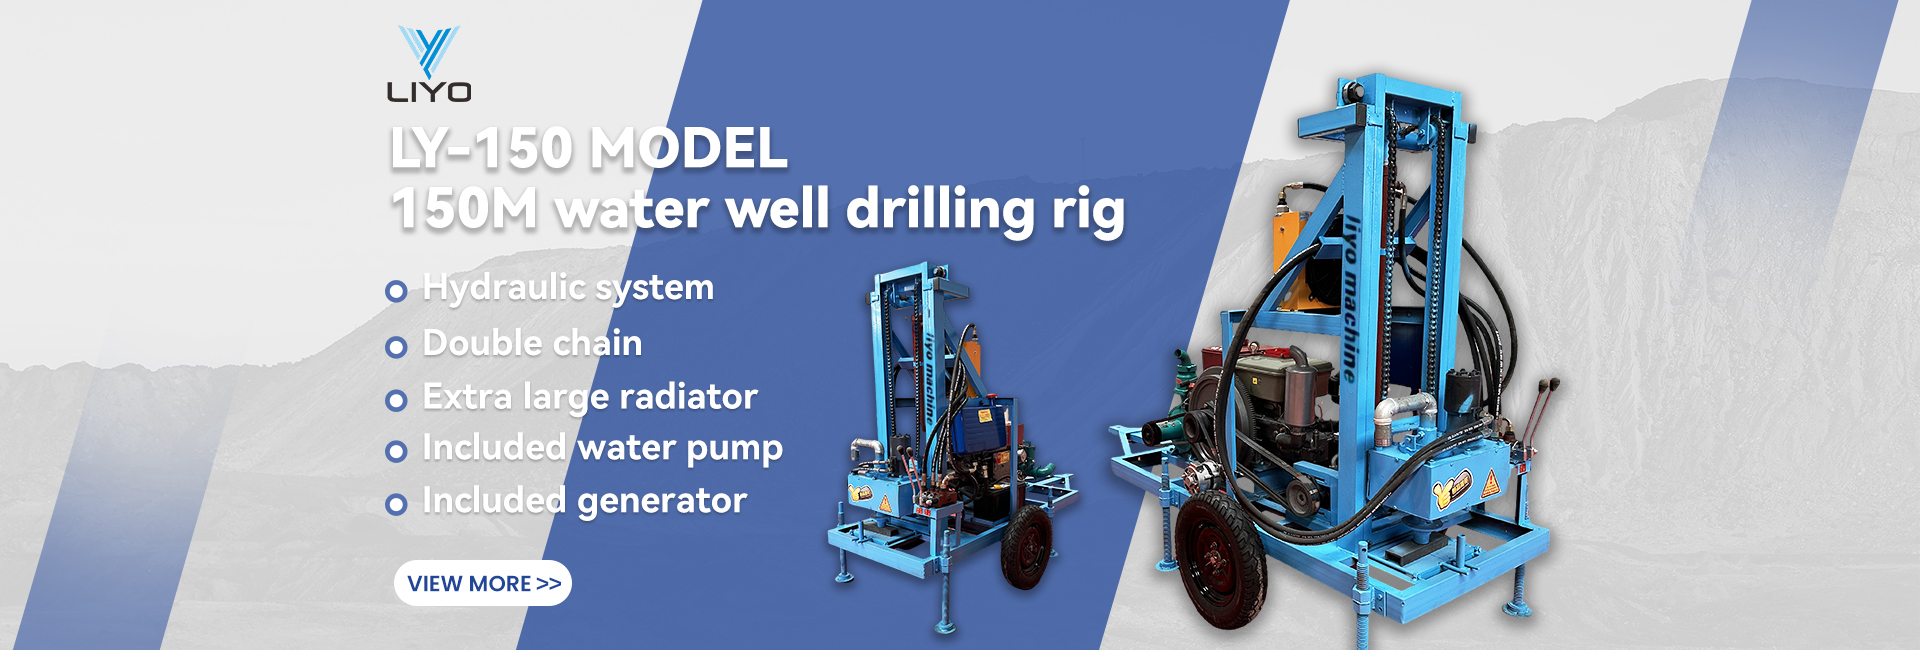 LIYO-150 water well drilling rig